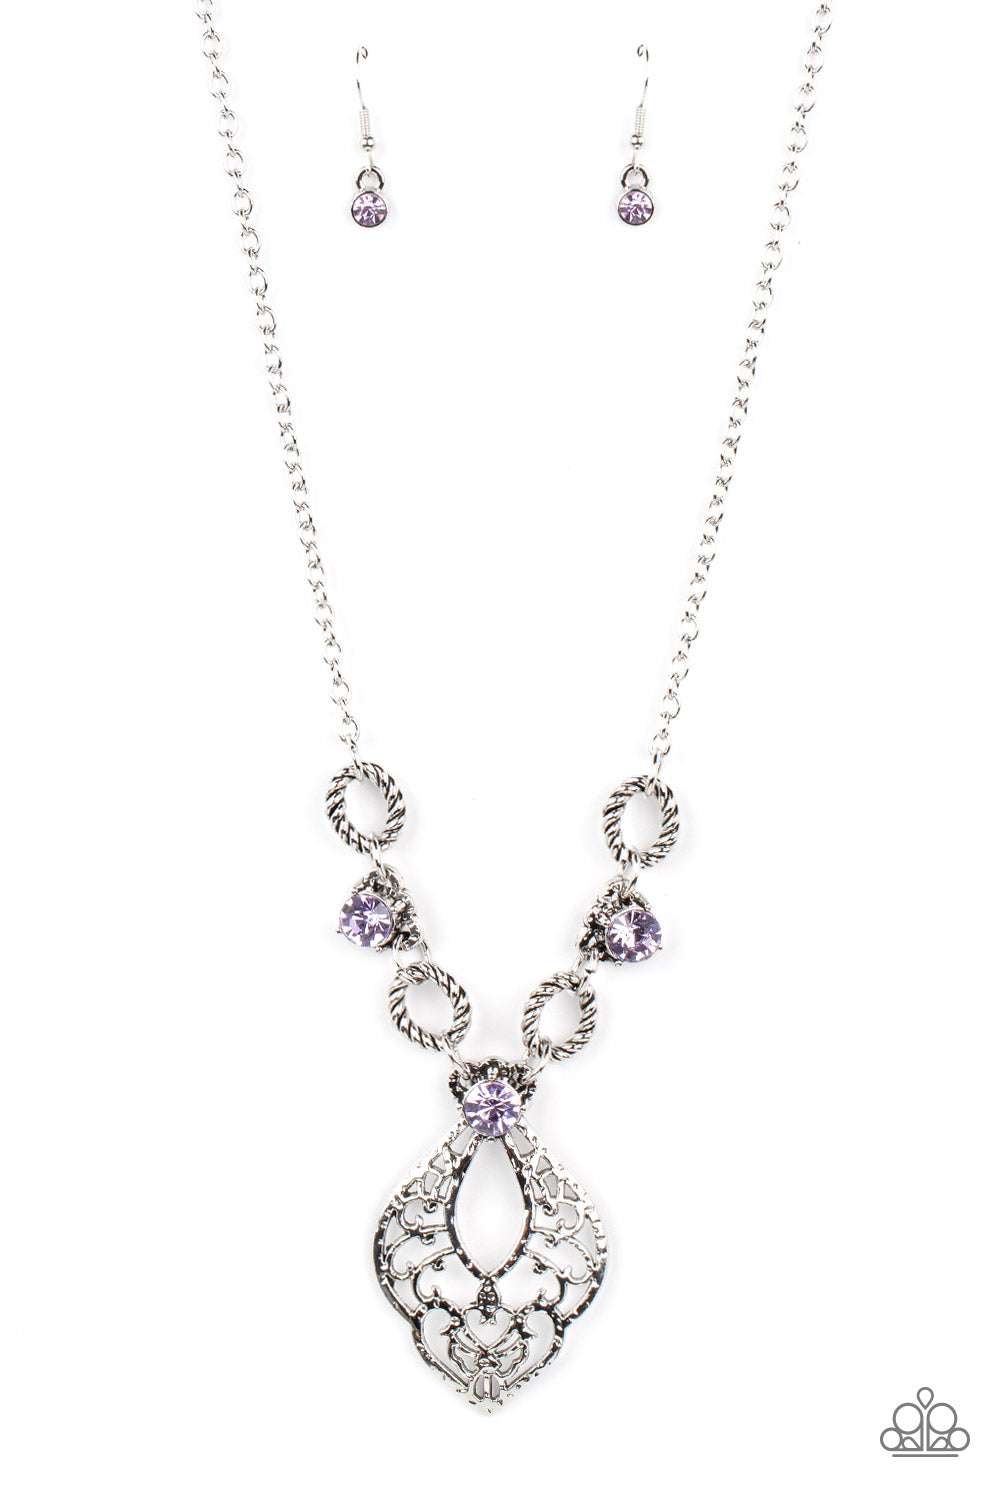 Contemporary Connections Paparazzi Accessories Necklace with Earrings Purple